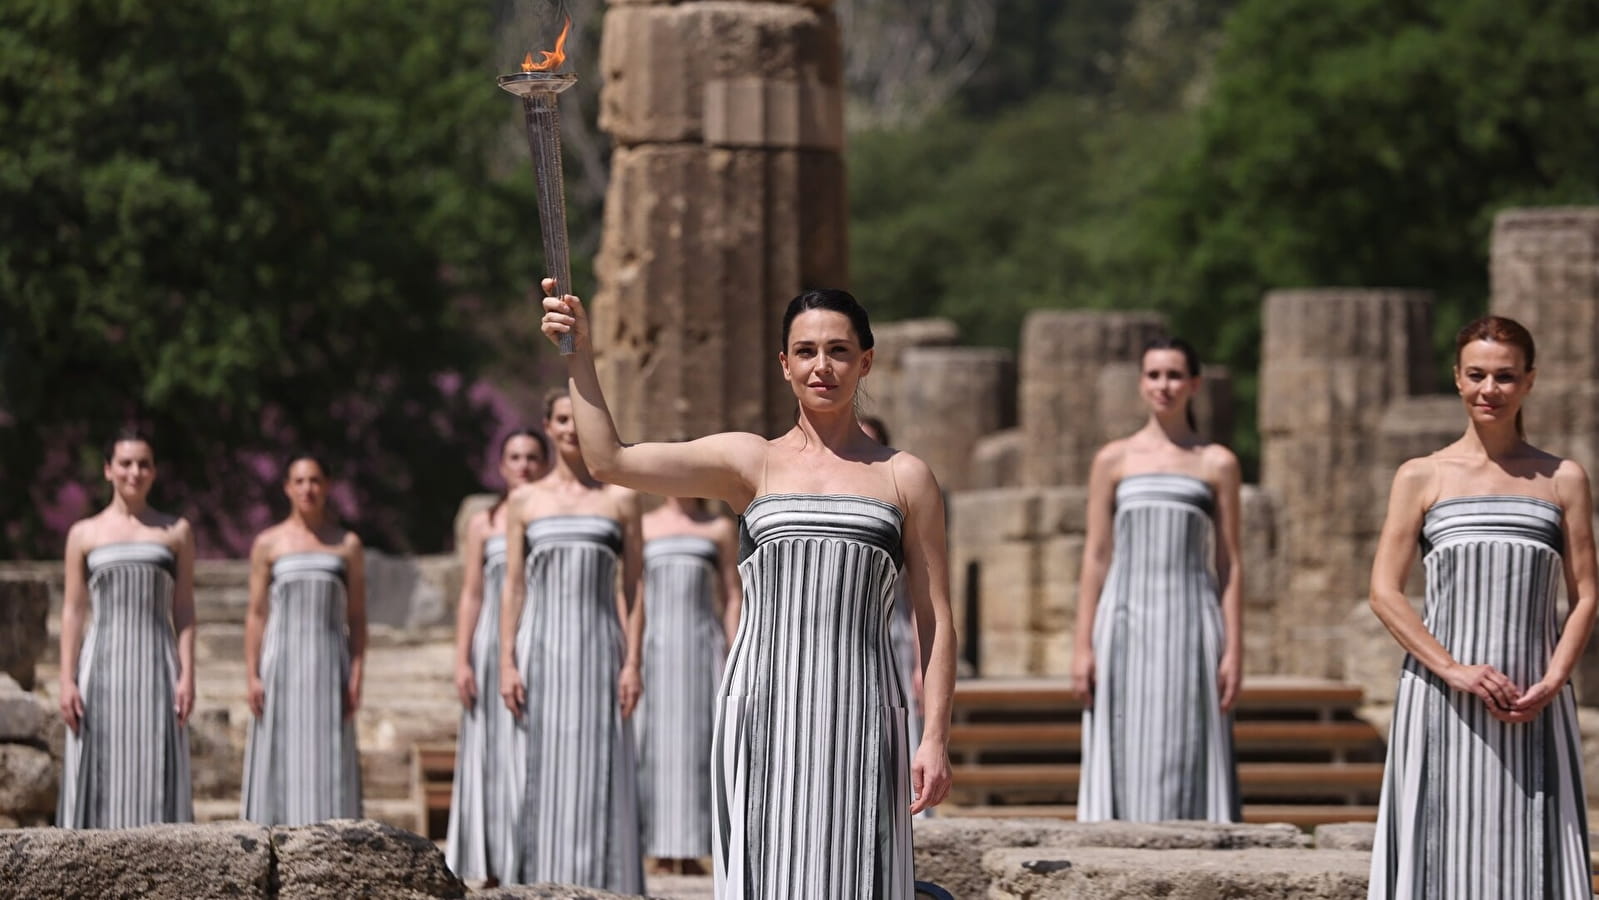 The 2024 Olympic flame passes through Côte-d'Or